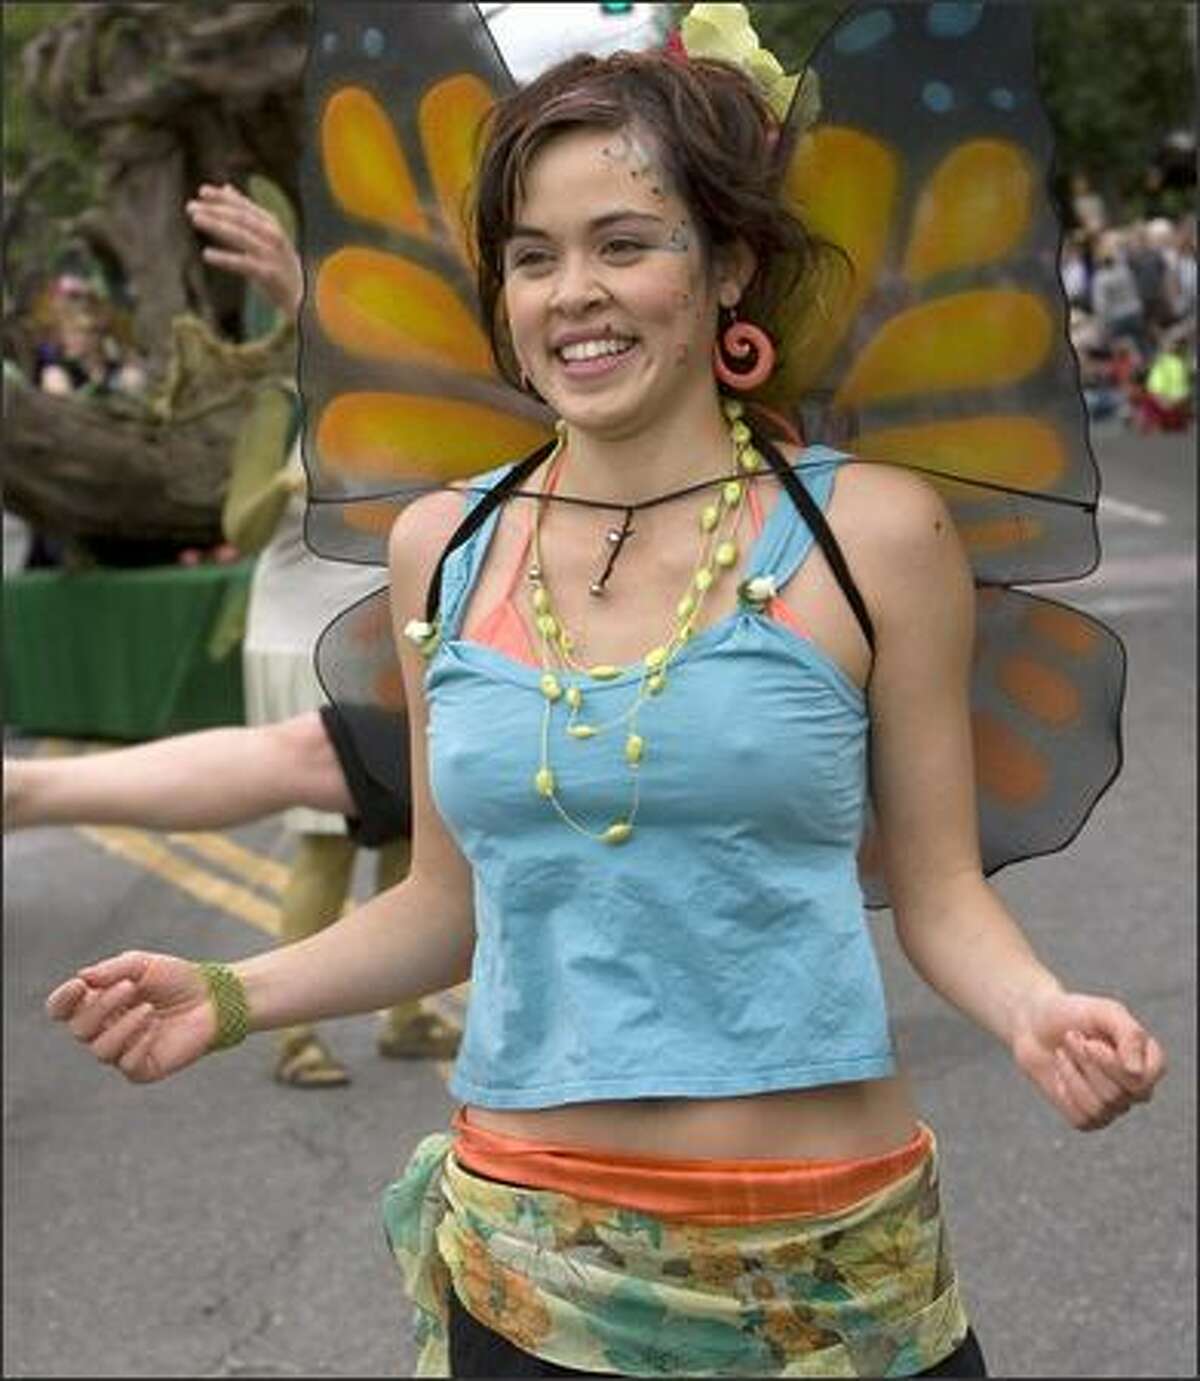 Angie Lemke, dressed as a butterfly, dances in the parade.